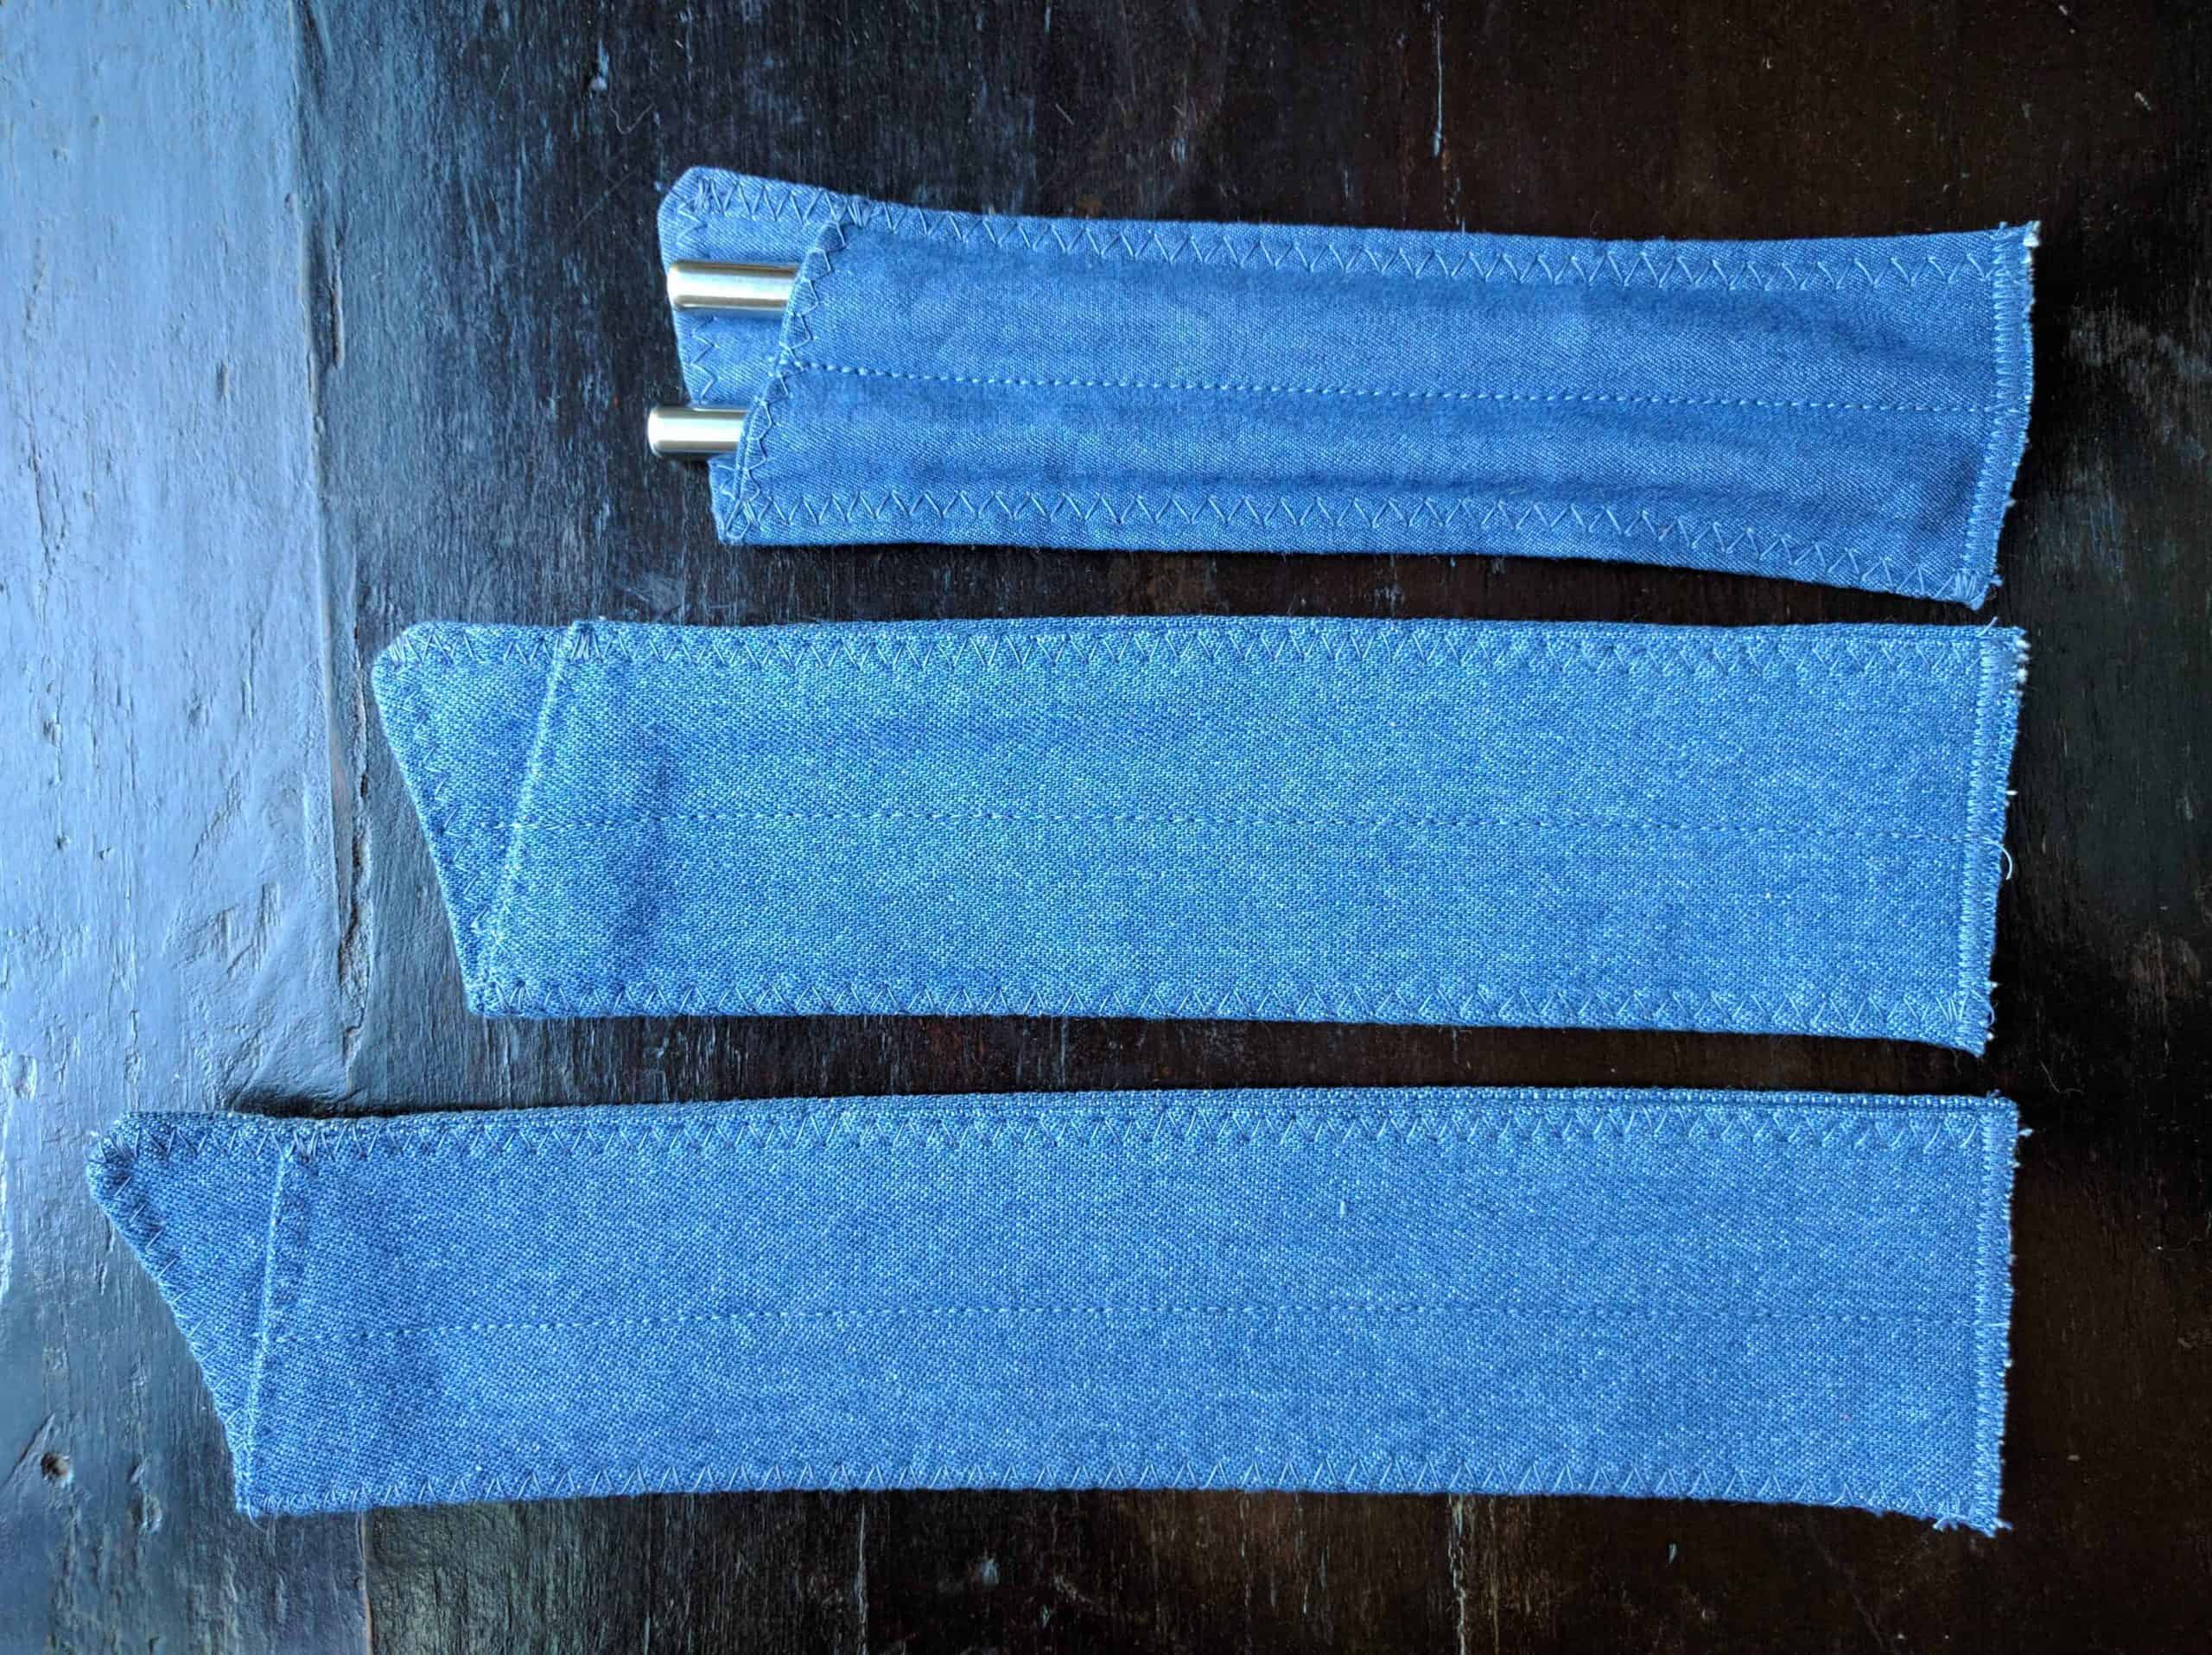 Straw sleeves to carry reusable glass or stainless steel straws